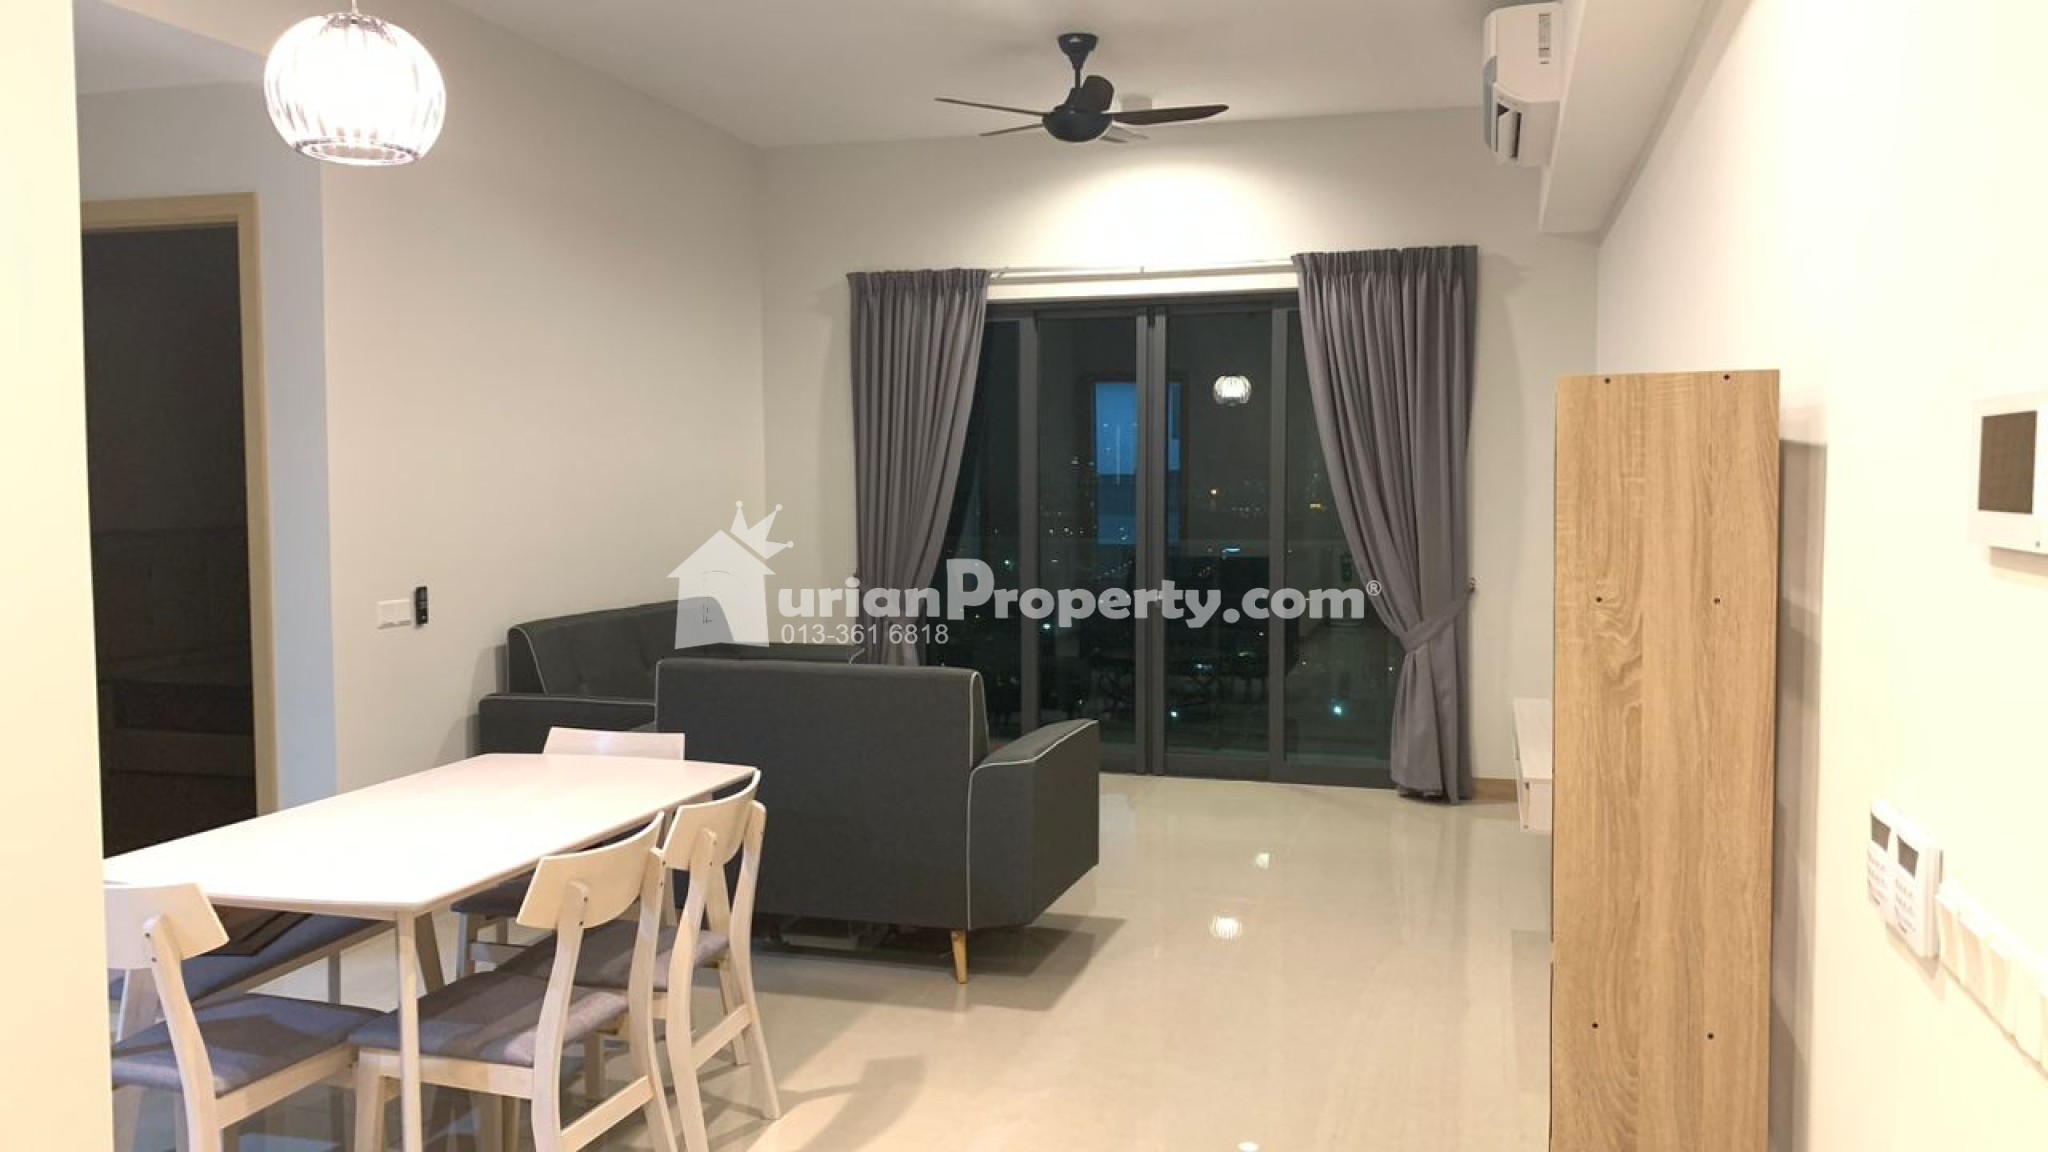 Condo For Rent at Megah Rise